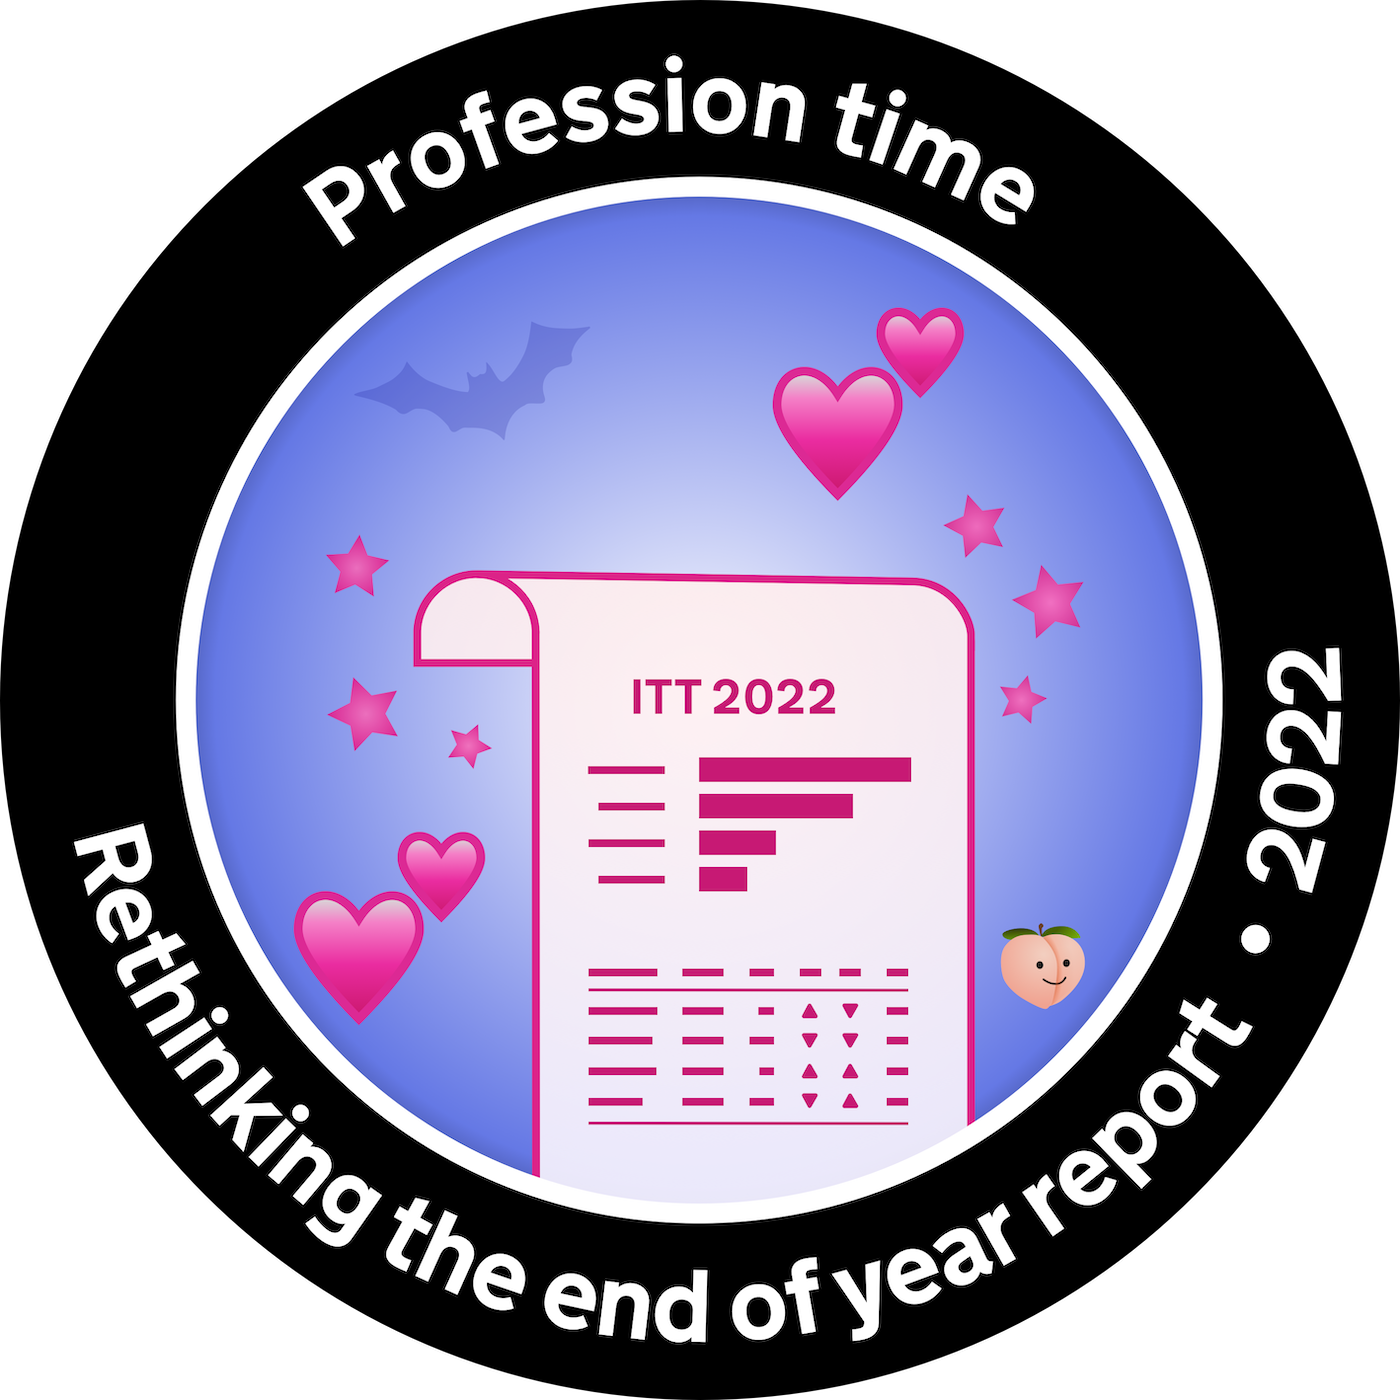 Screenshot of Profession time: rethinking the end of year report